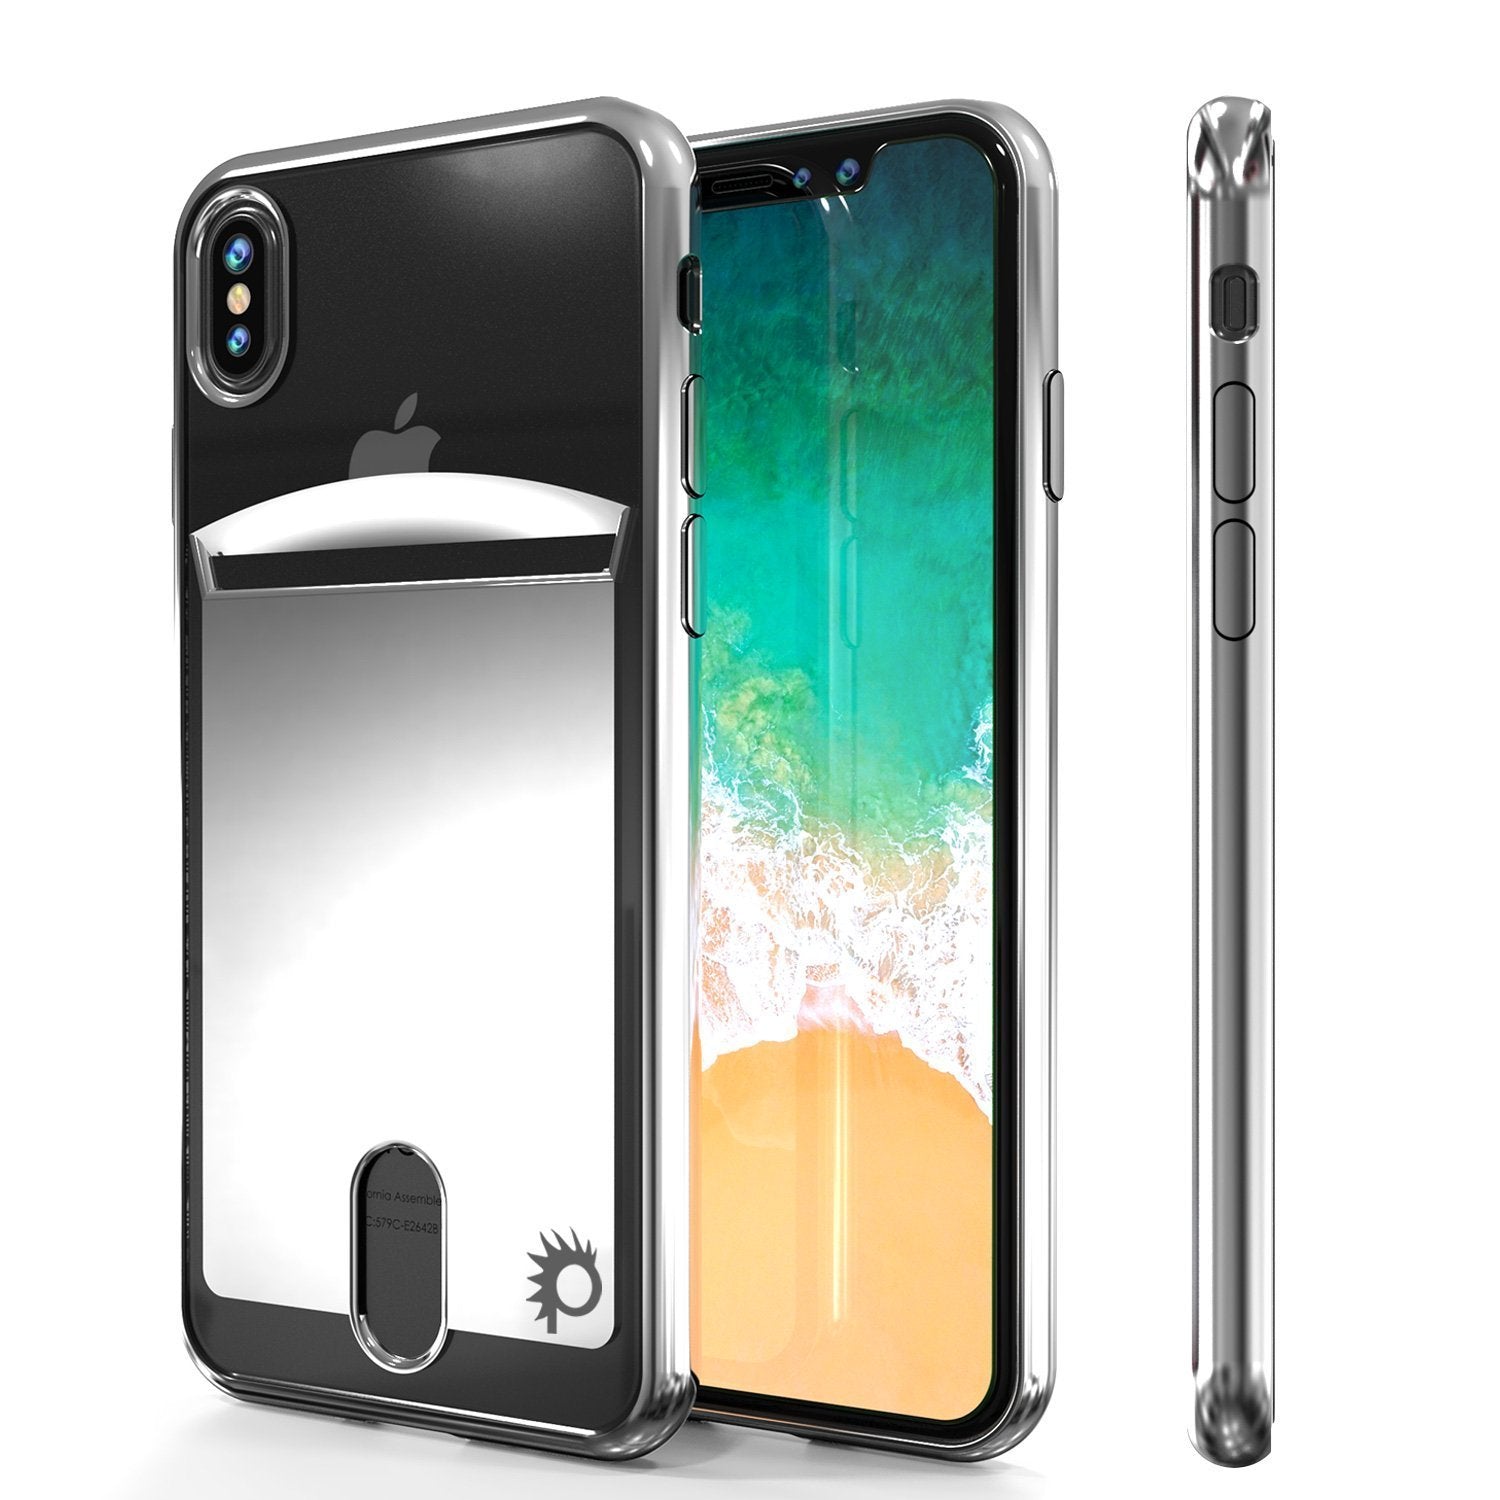 iPhone X Case, PUNKcase [LUCID Series] Slim Fit Protective Dual Layer Armor Cover [Silver]